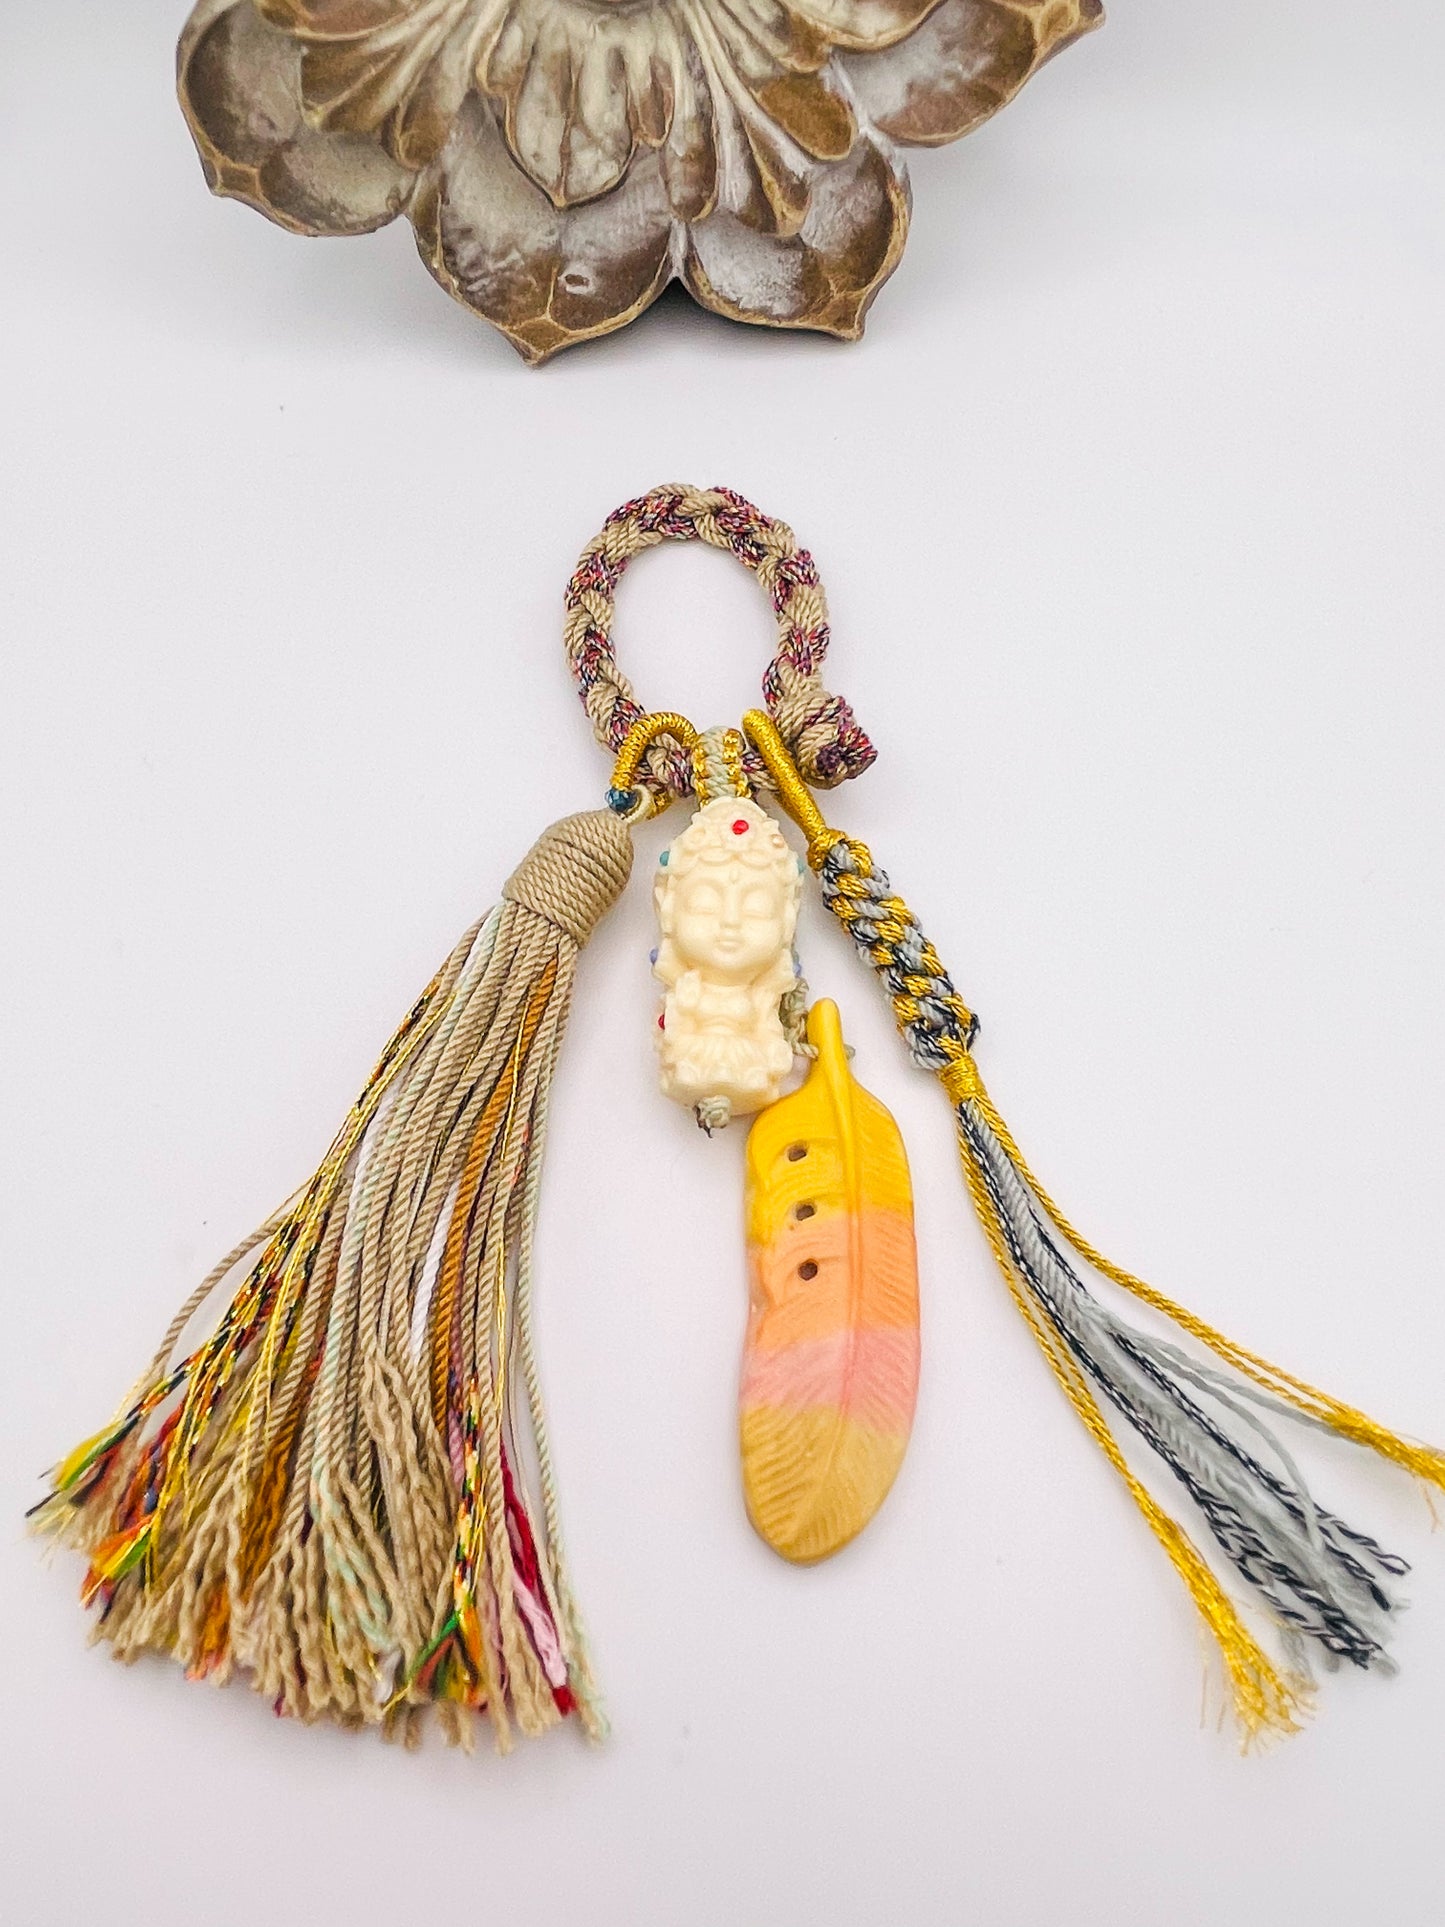 Ivory Nut Budda Carving with Feather on Handmade Tassel Keychain